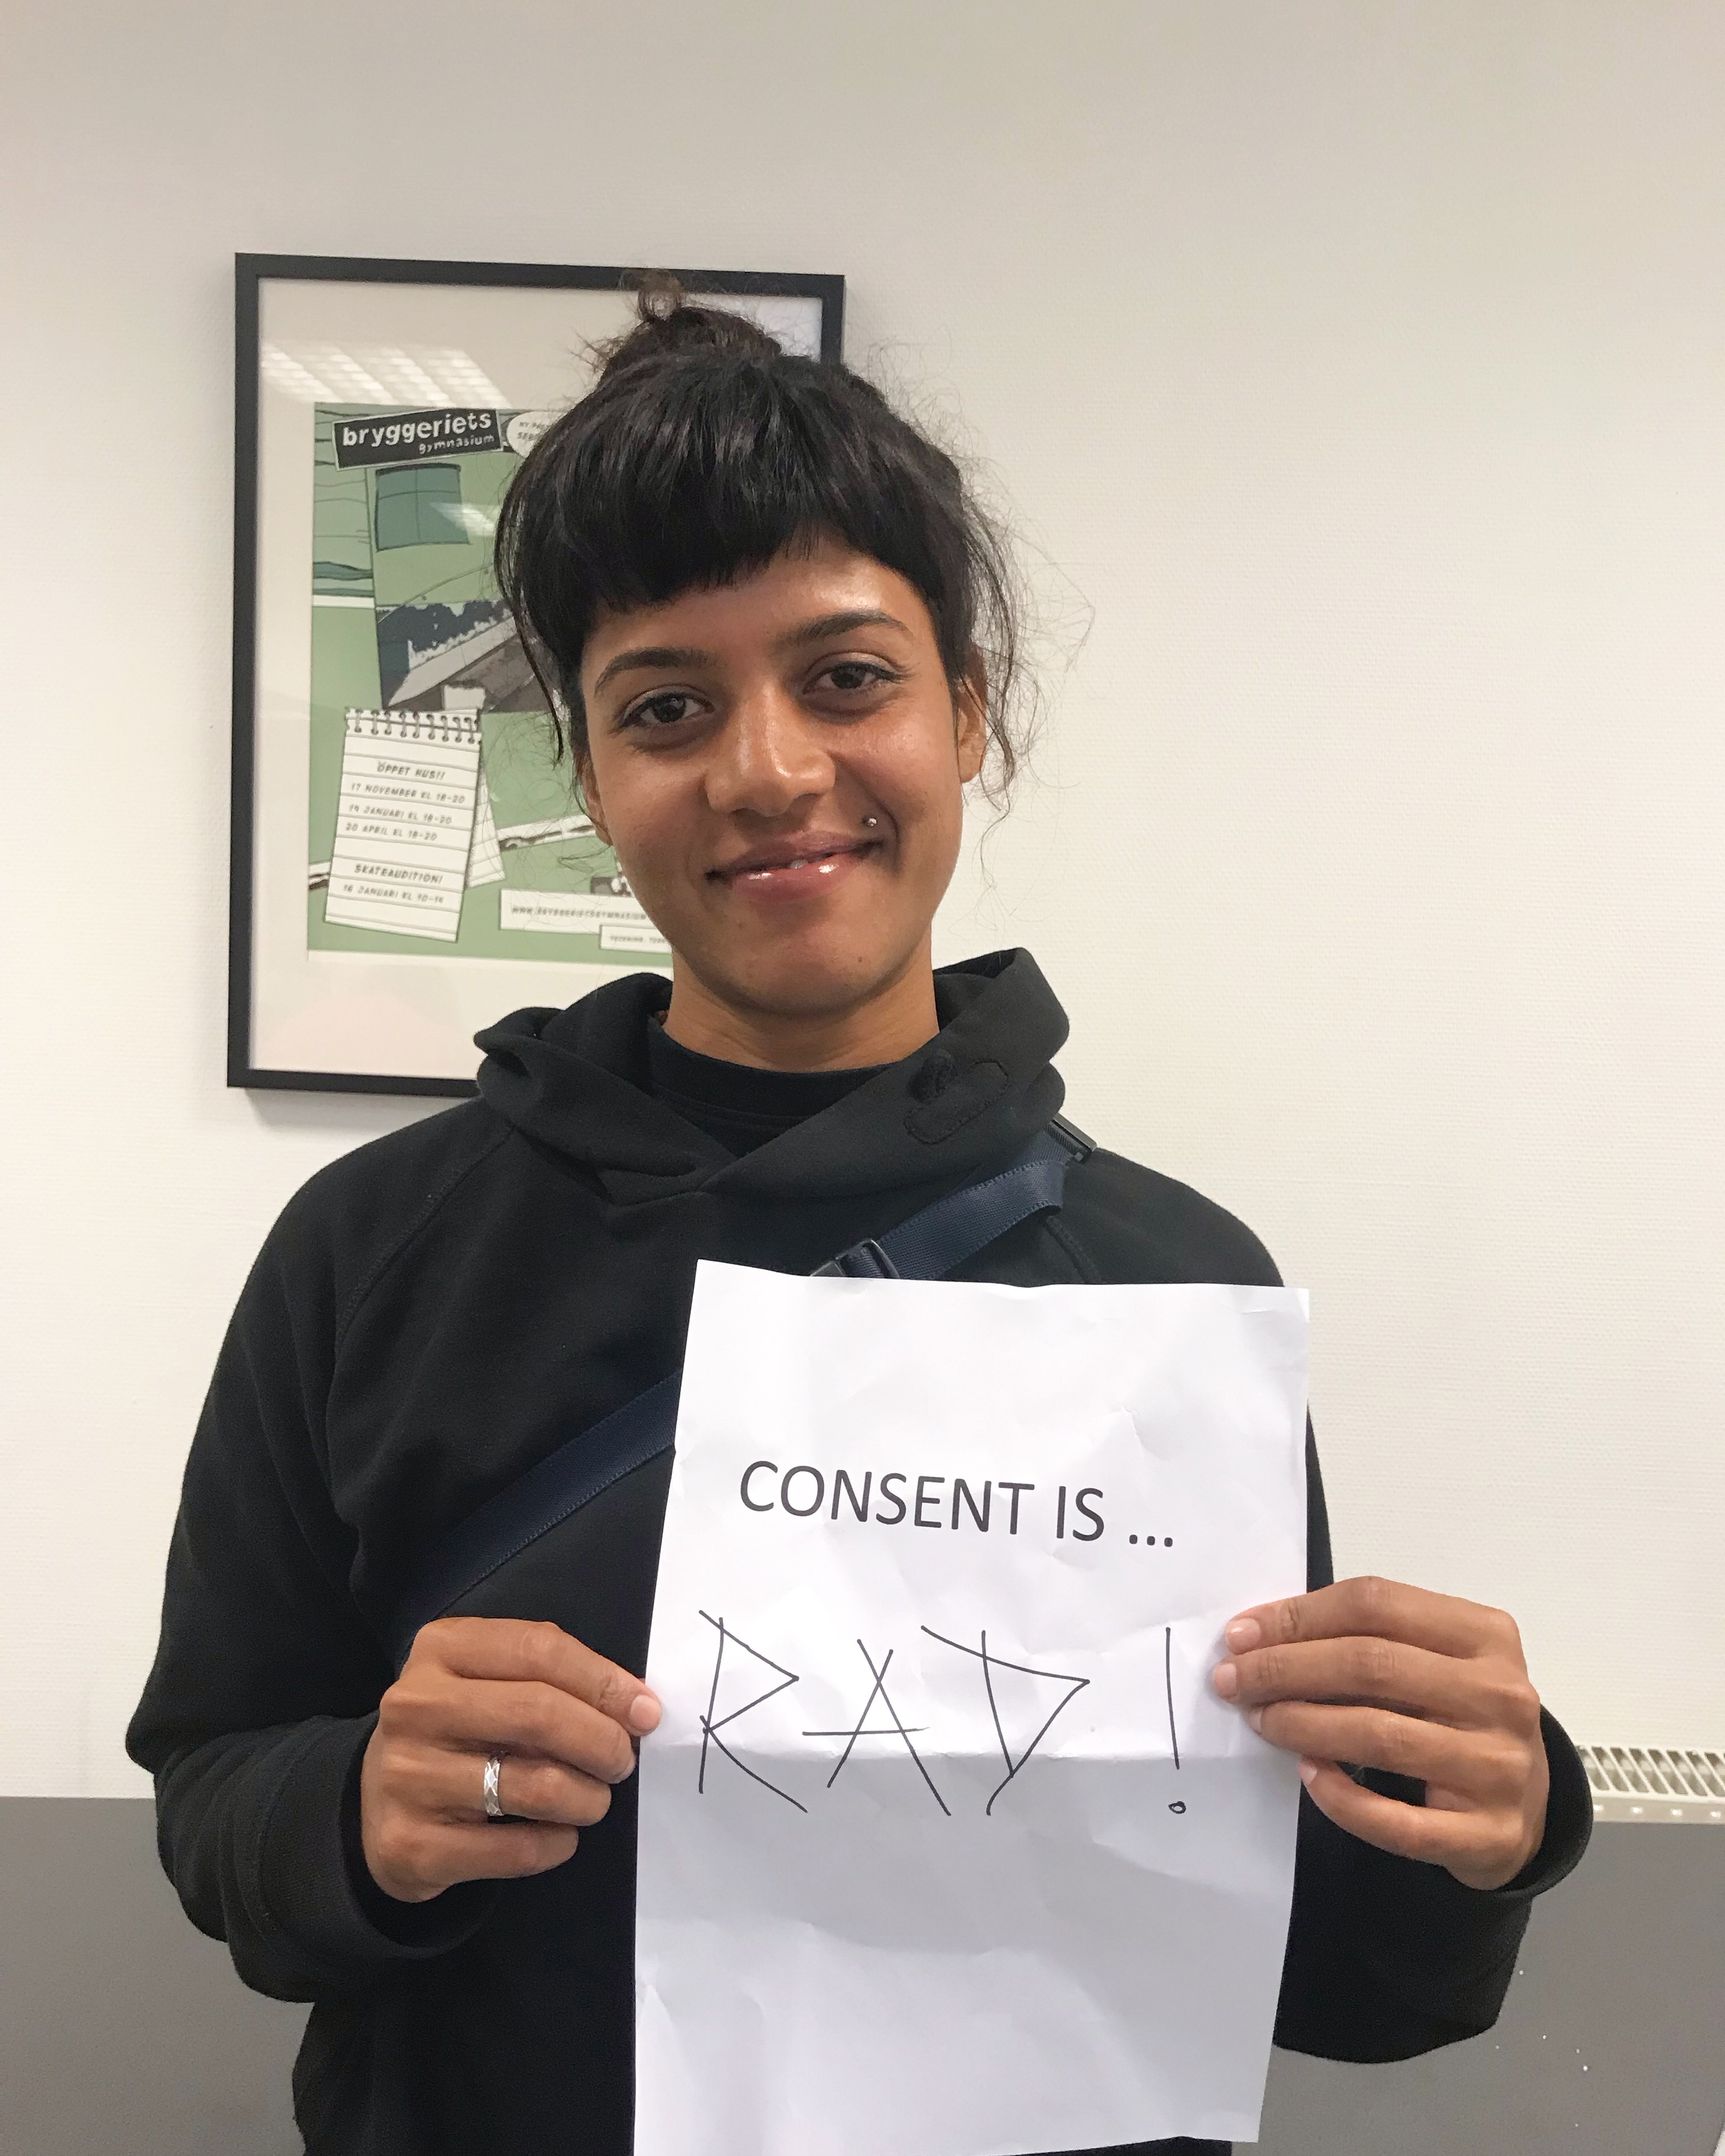 Atita, from India, is dressed in black and indoors holding up a piece of paper saying Consent is Rad.